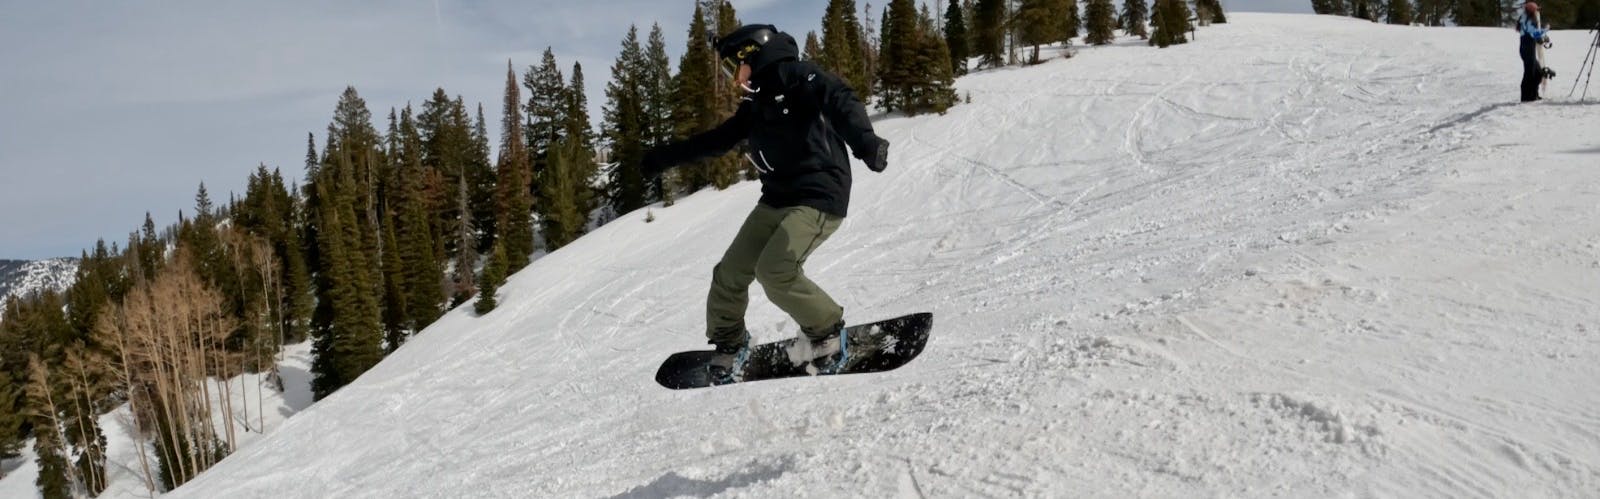 Curated Snowboard Expert Everett Pelkey jumping with the 2023 Jones Mountain Twin snowboard